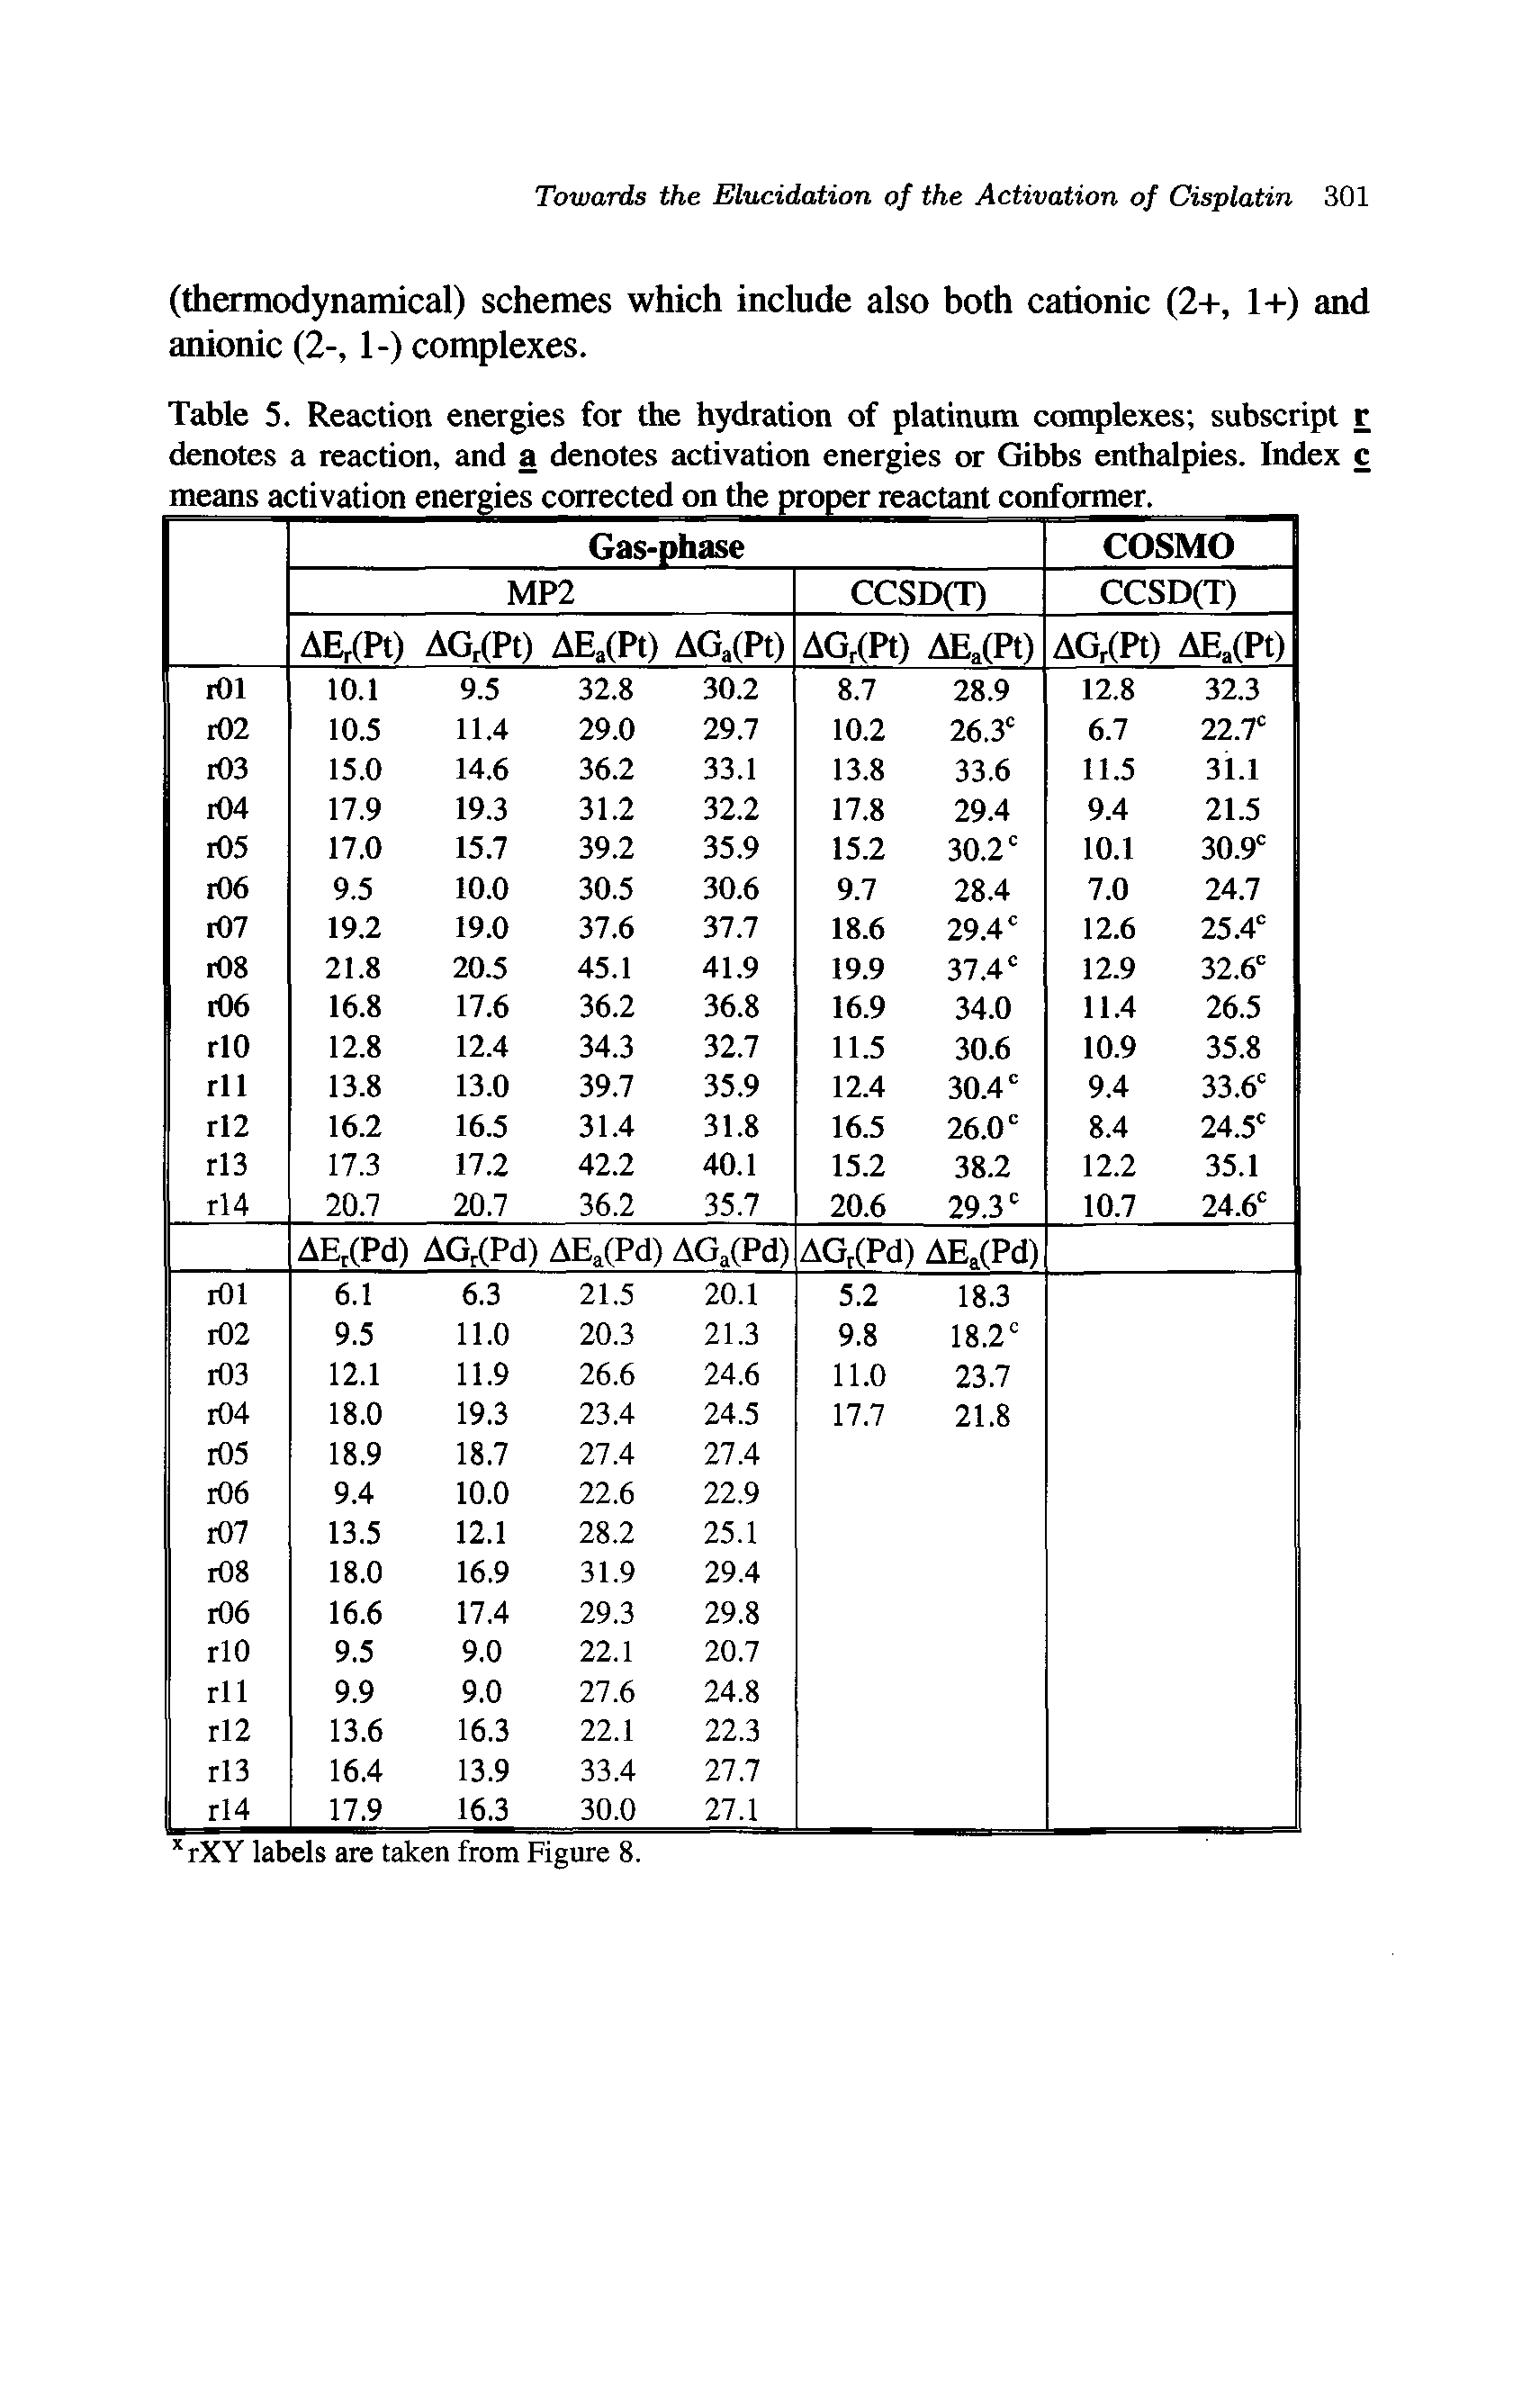 Table 5. Reaction energies for the hydration of platinum complexes subscript denotes a reaction, and a denotes activation energies or Gibbs enthalpies. Index means activation energies corrected on the proper reactant conformer.